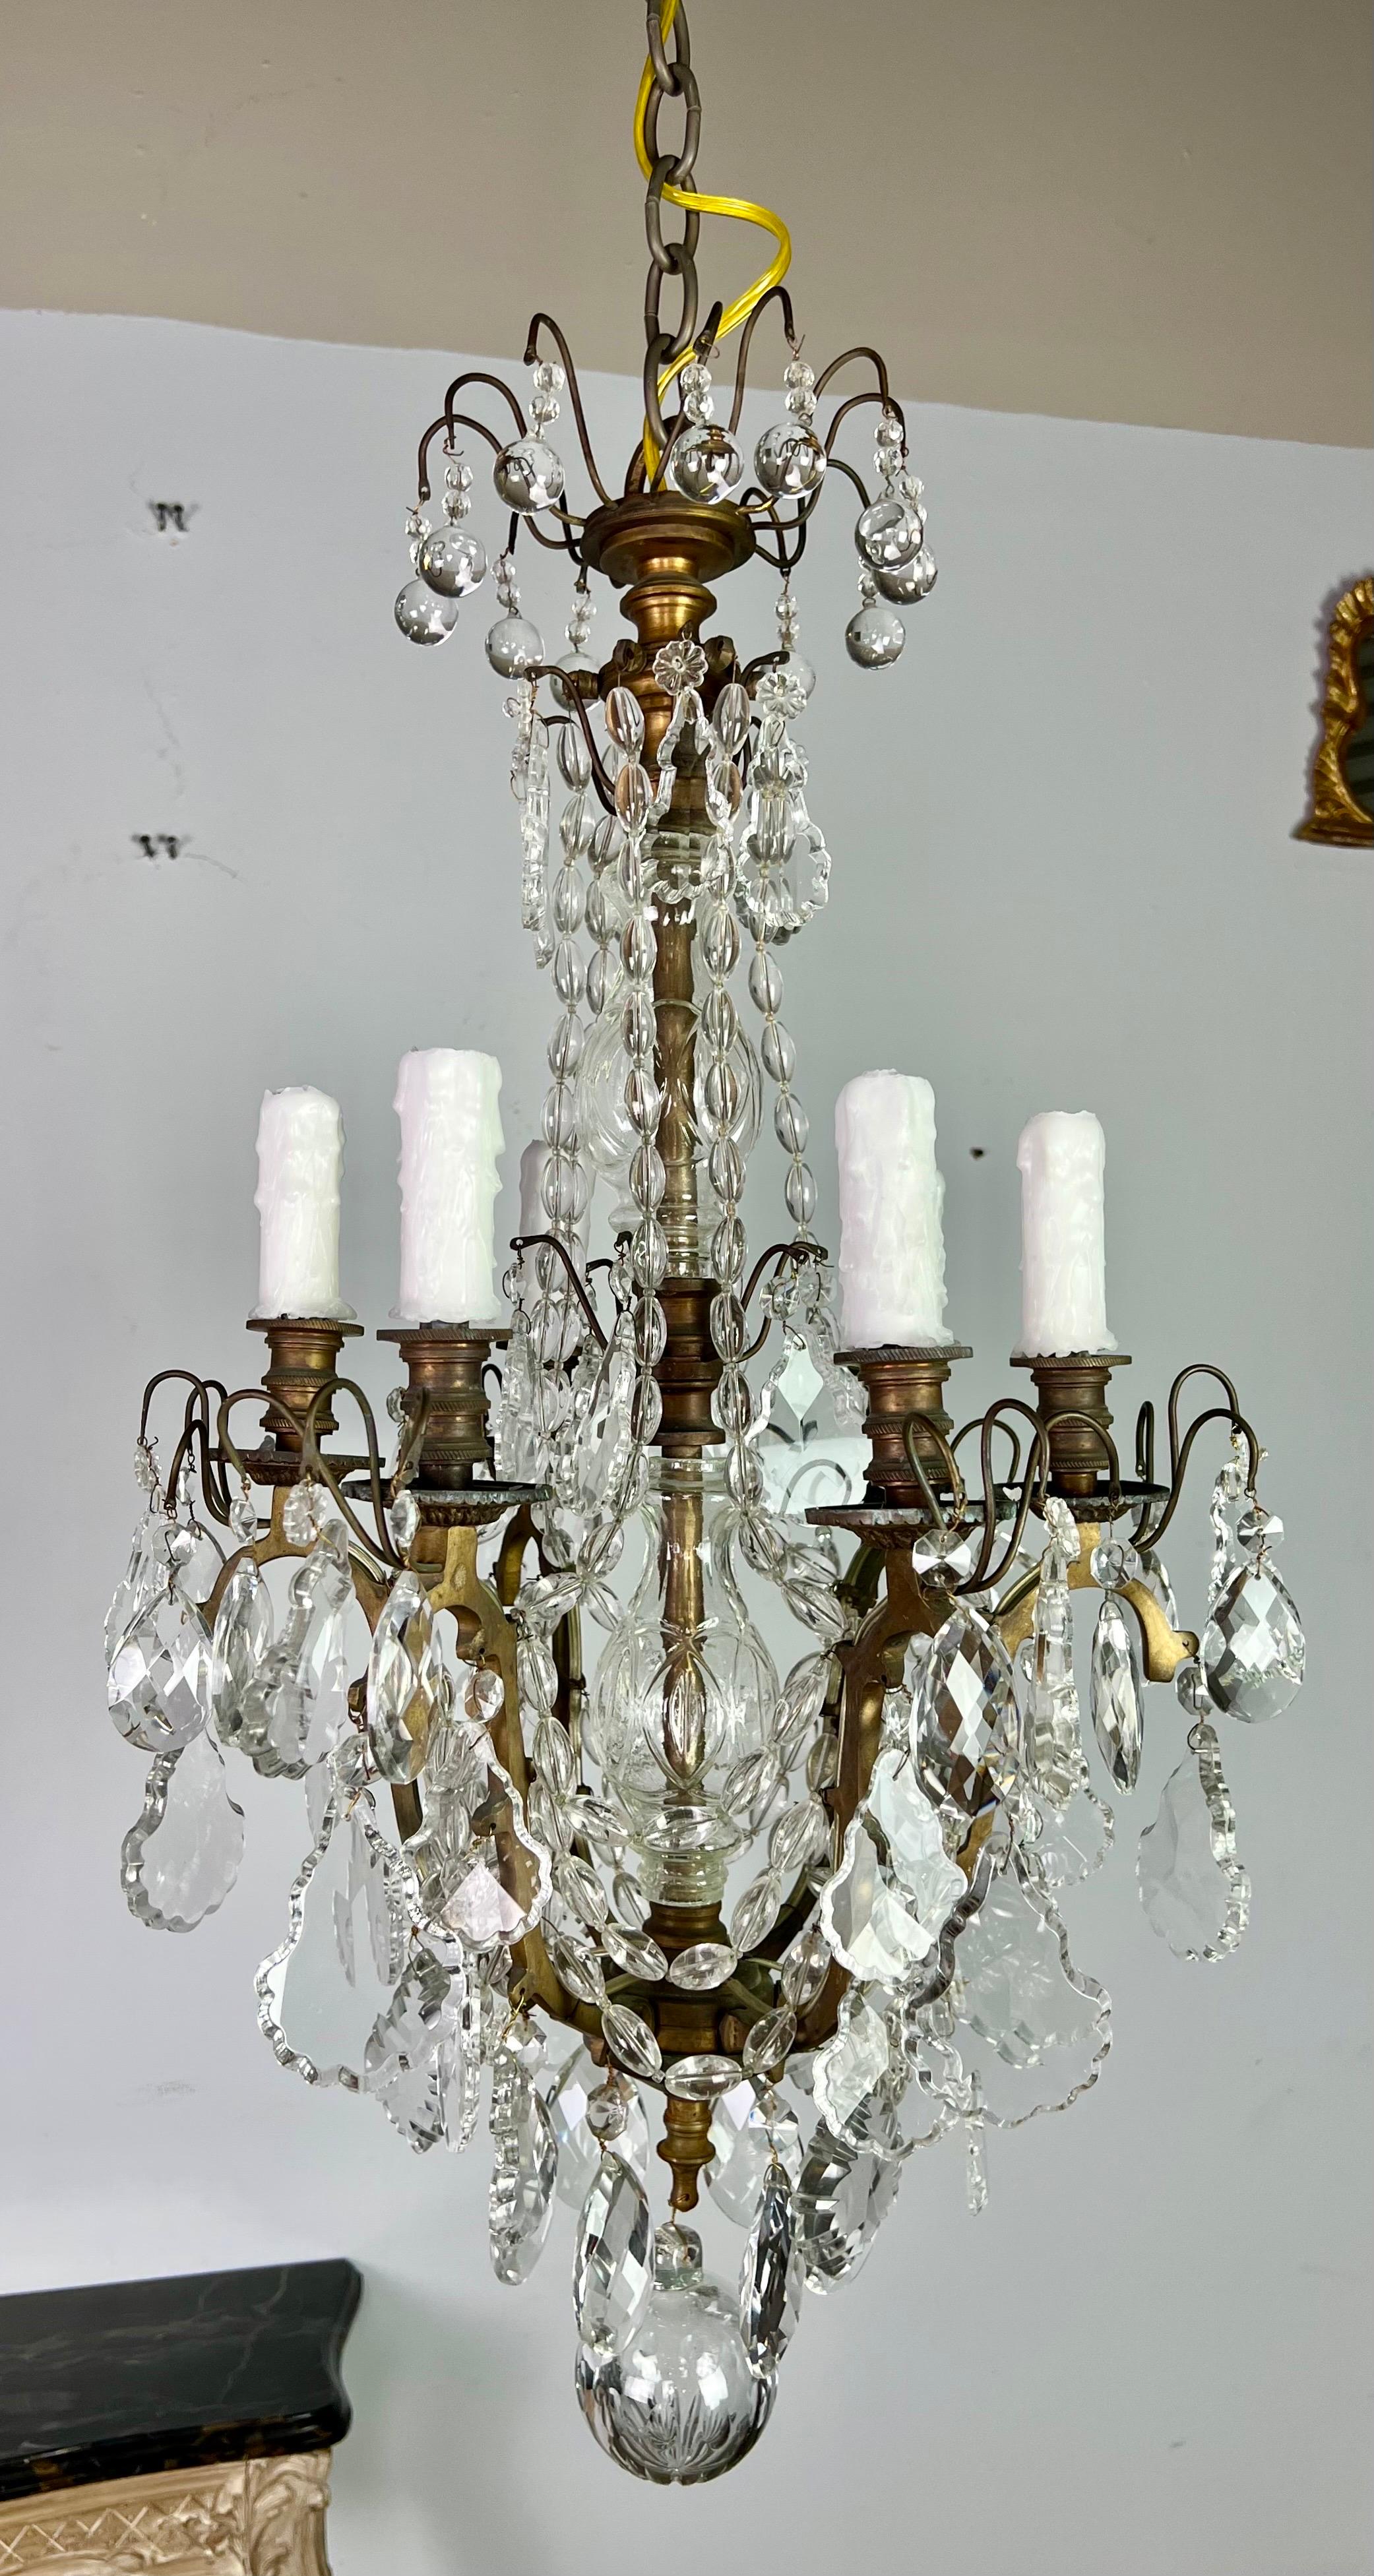 Pair of 19th century French crystal beaded bronze chandeliers. Each chandelier has six lights that have been rewired with drip wax candle covers and include chain & canopies. The chandeliers are adorned with various styles of crystals and have large